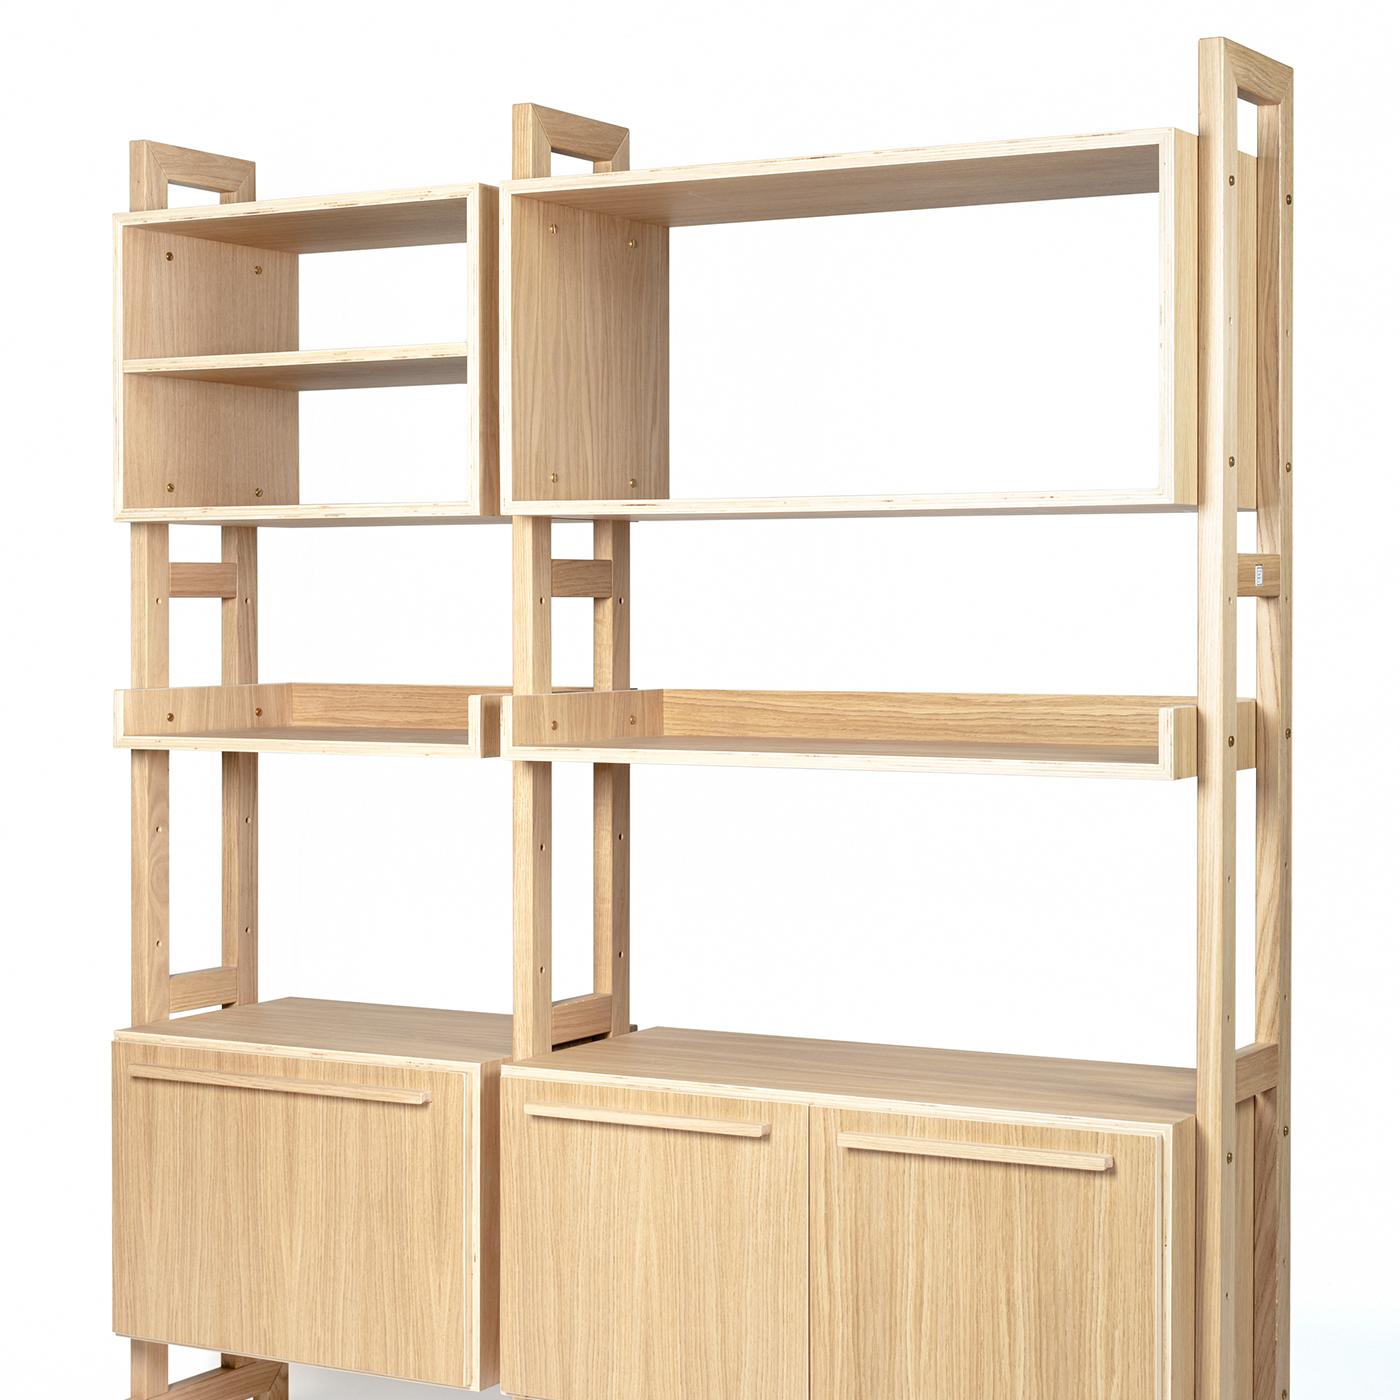 Give any living or office space a modern touch with this customizable, modular bookshelf with supporting sides in solid oak and oak plywood shelves and containers. The entire piece is covered in a natural, water-based paint finish for a clean and